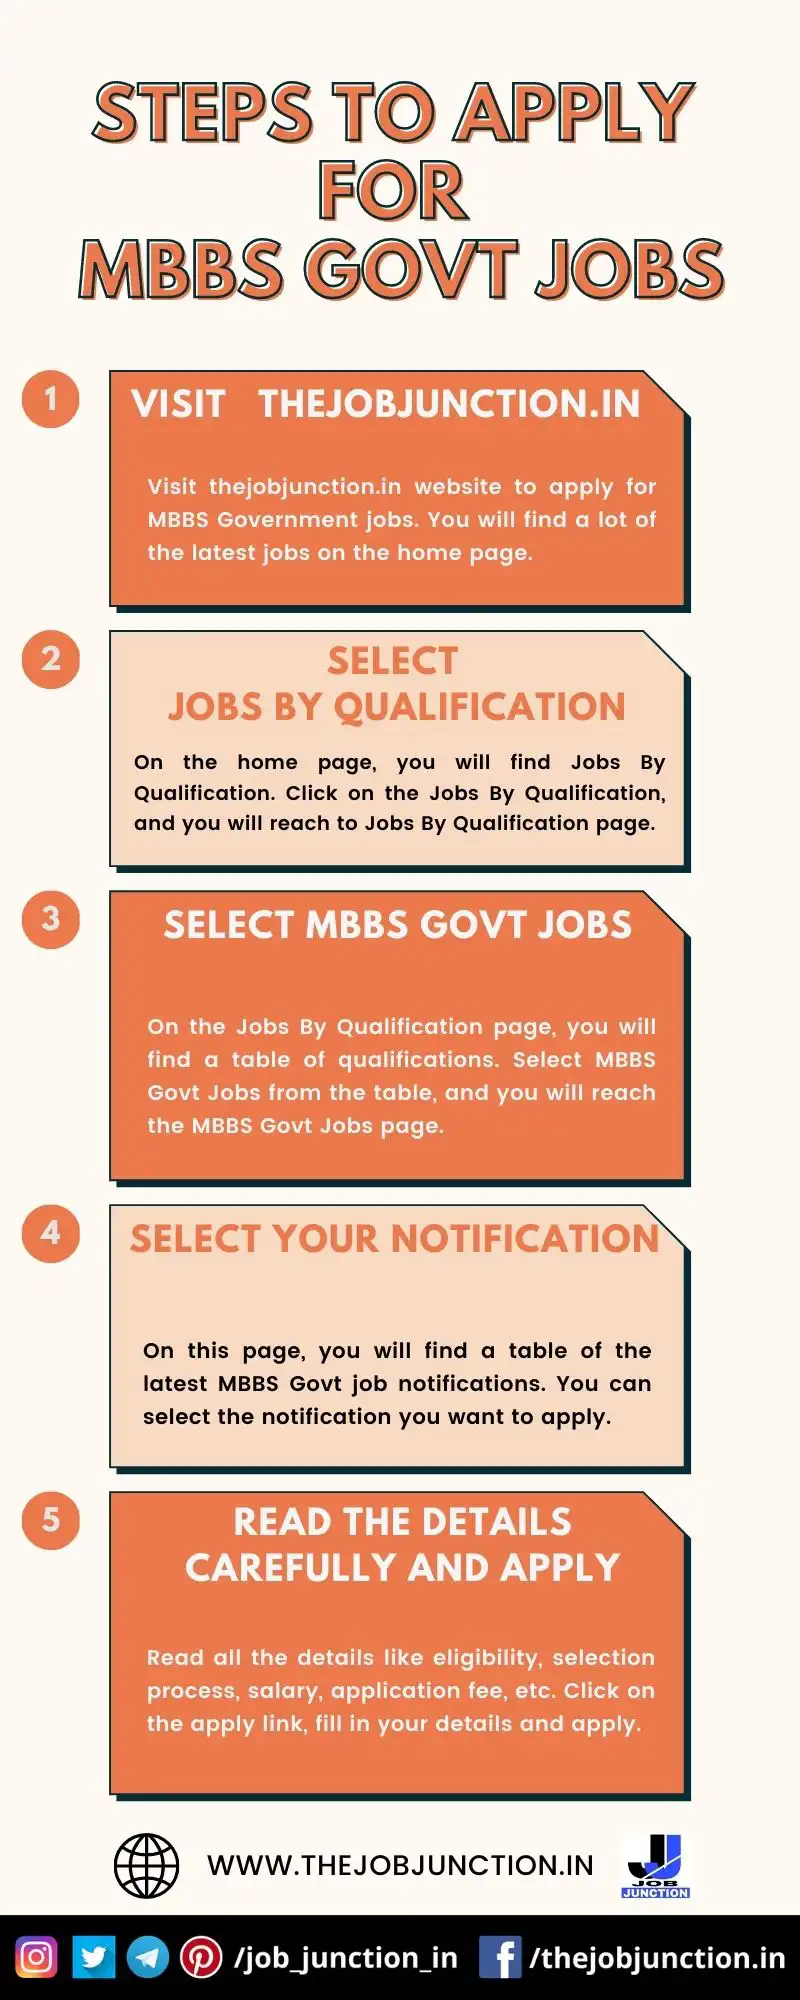 STEPS TO APPLY FOR MBBS GOVT JOBS